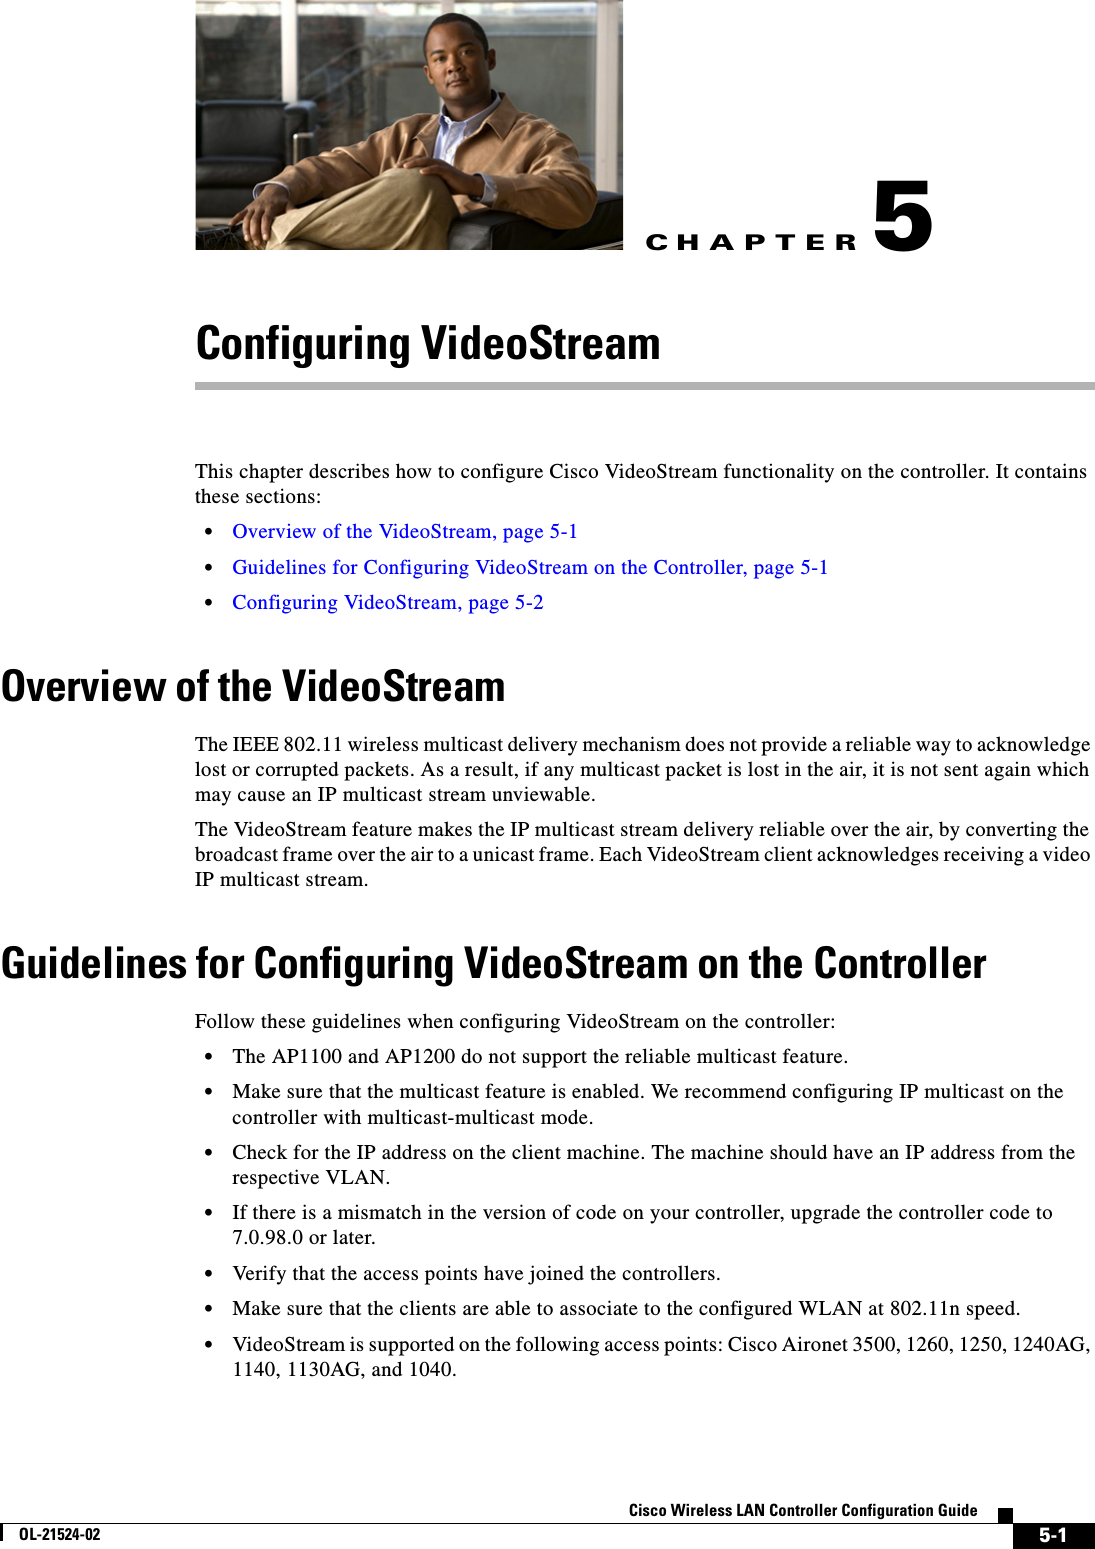 CHAPTER5-1Cisco Wireless LAN Controller Configuration GuideOL-21524-025Configuring VideoStreamThis chapter describes how to configure Cisco VideoStream functionality on the controller. It contains these sections:  • Overview of the VideoStream, page 5-1  • Guidelines for Configuring VideoStream on the Controller, page 5-1  • Configuring VideoStream, page 5-2Overview of the VideoStreamThe IEEE 802.11 wireless multicast delivery mechanism does not provide a reliable way to acknowledge lost or corrupted packets. As a result, if any multicast packet is lost in the air, it is not sent again which may cause an IP multicast stream unviewable. The VideoStream feature makes the IP multicast stream delivery reliable over the air, by converting the broadcast frame over the air to a unicast frame. Each VideoStream client acknowledges receiving a video IP multicast stream.Guidelines for Configuring VideoStream on the ControllerFollow these guidelines when configuring VideoStream on the controller:  • The AP1100 and AP1200 do not support the reliable multicast feature.  • Make sure that the multicast feature is enabled. We recommend configuring IP multicast on the controller with multicast-multicast mode.  • Check for the IP address on the client machine. The machine should have an IP address from the respective VLAN.  • If there is a mismatch in the version of code on your controller, upgrade the controller code to 7.0.98.0 or later.  • Verify that the access points have joined the controllers.  • Make sure that the clients are able to associate to the configured WLAN at 802.11n speed.  • VideoStream is supported on the following access points: Cisco Aironet 3500, 1260, 1250, 1240AG, 1140, 1130AG, and 1040.